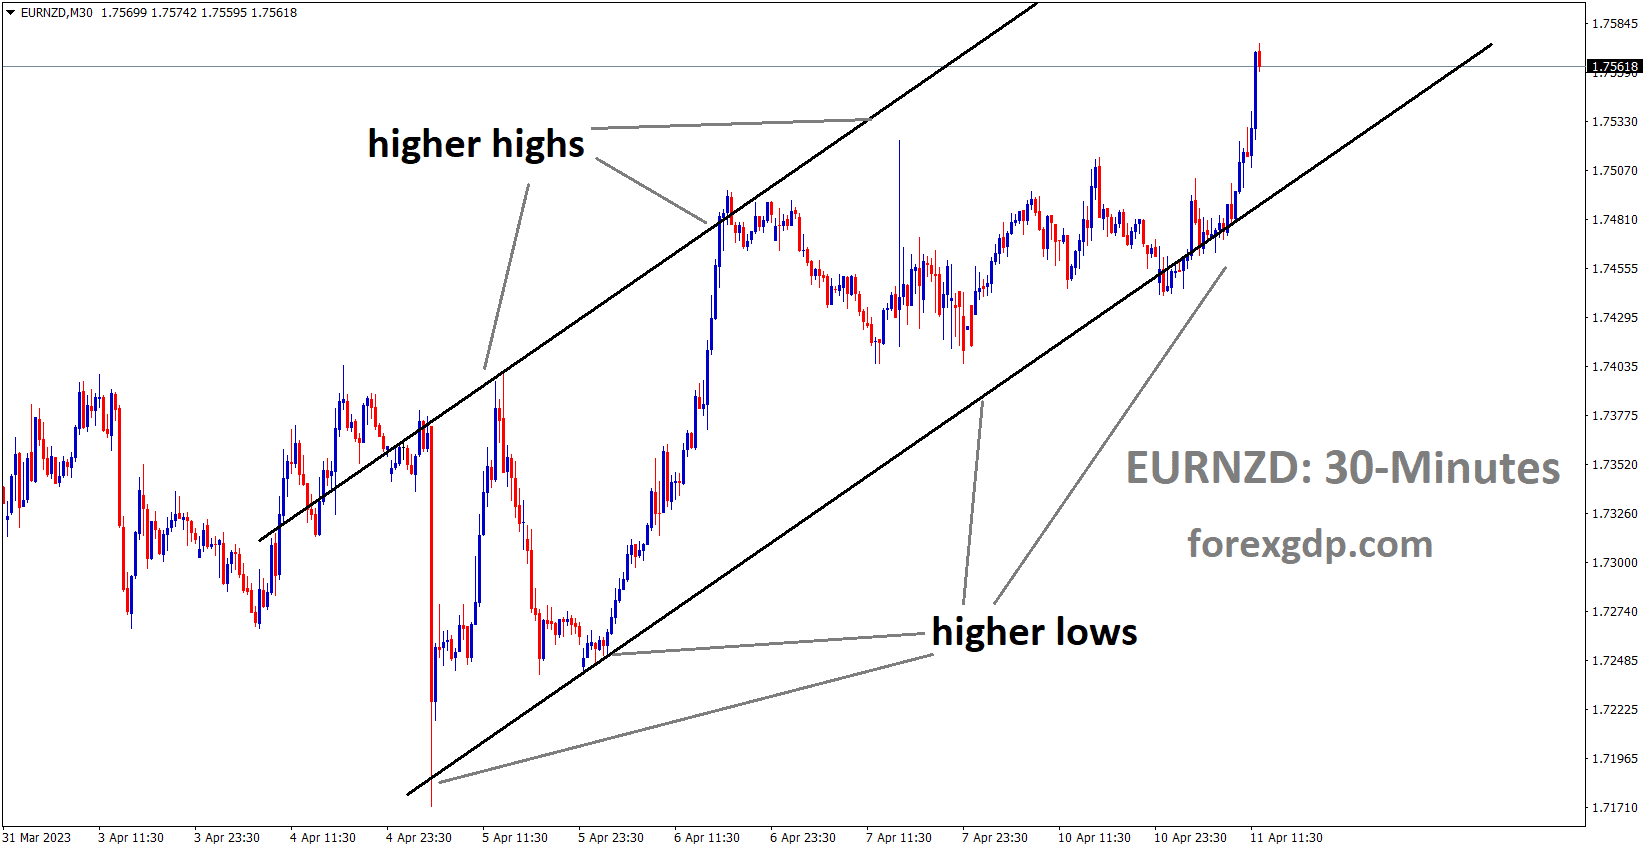 EURNZD is moving in an Ascending channel and the market has rebounded from the higher low area of the channel